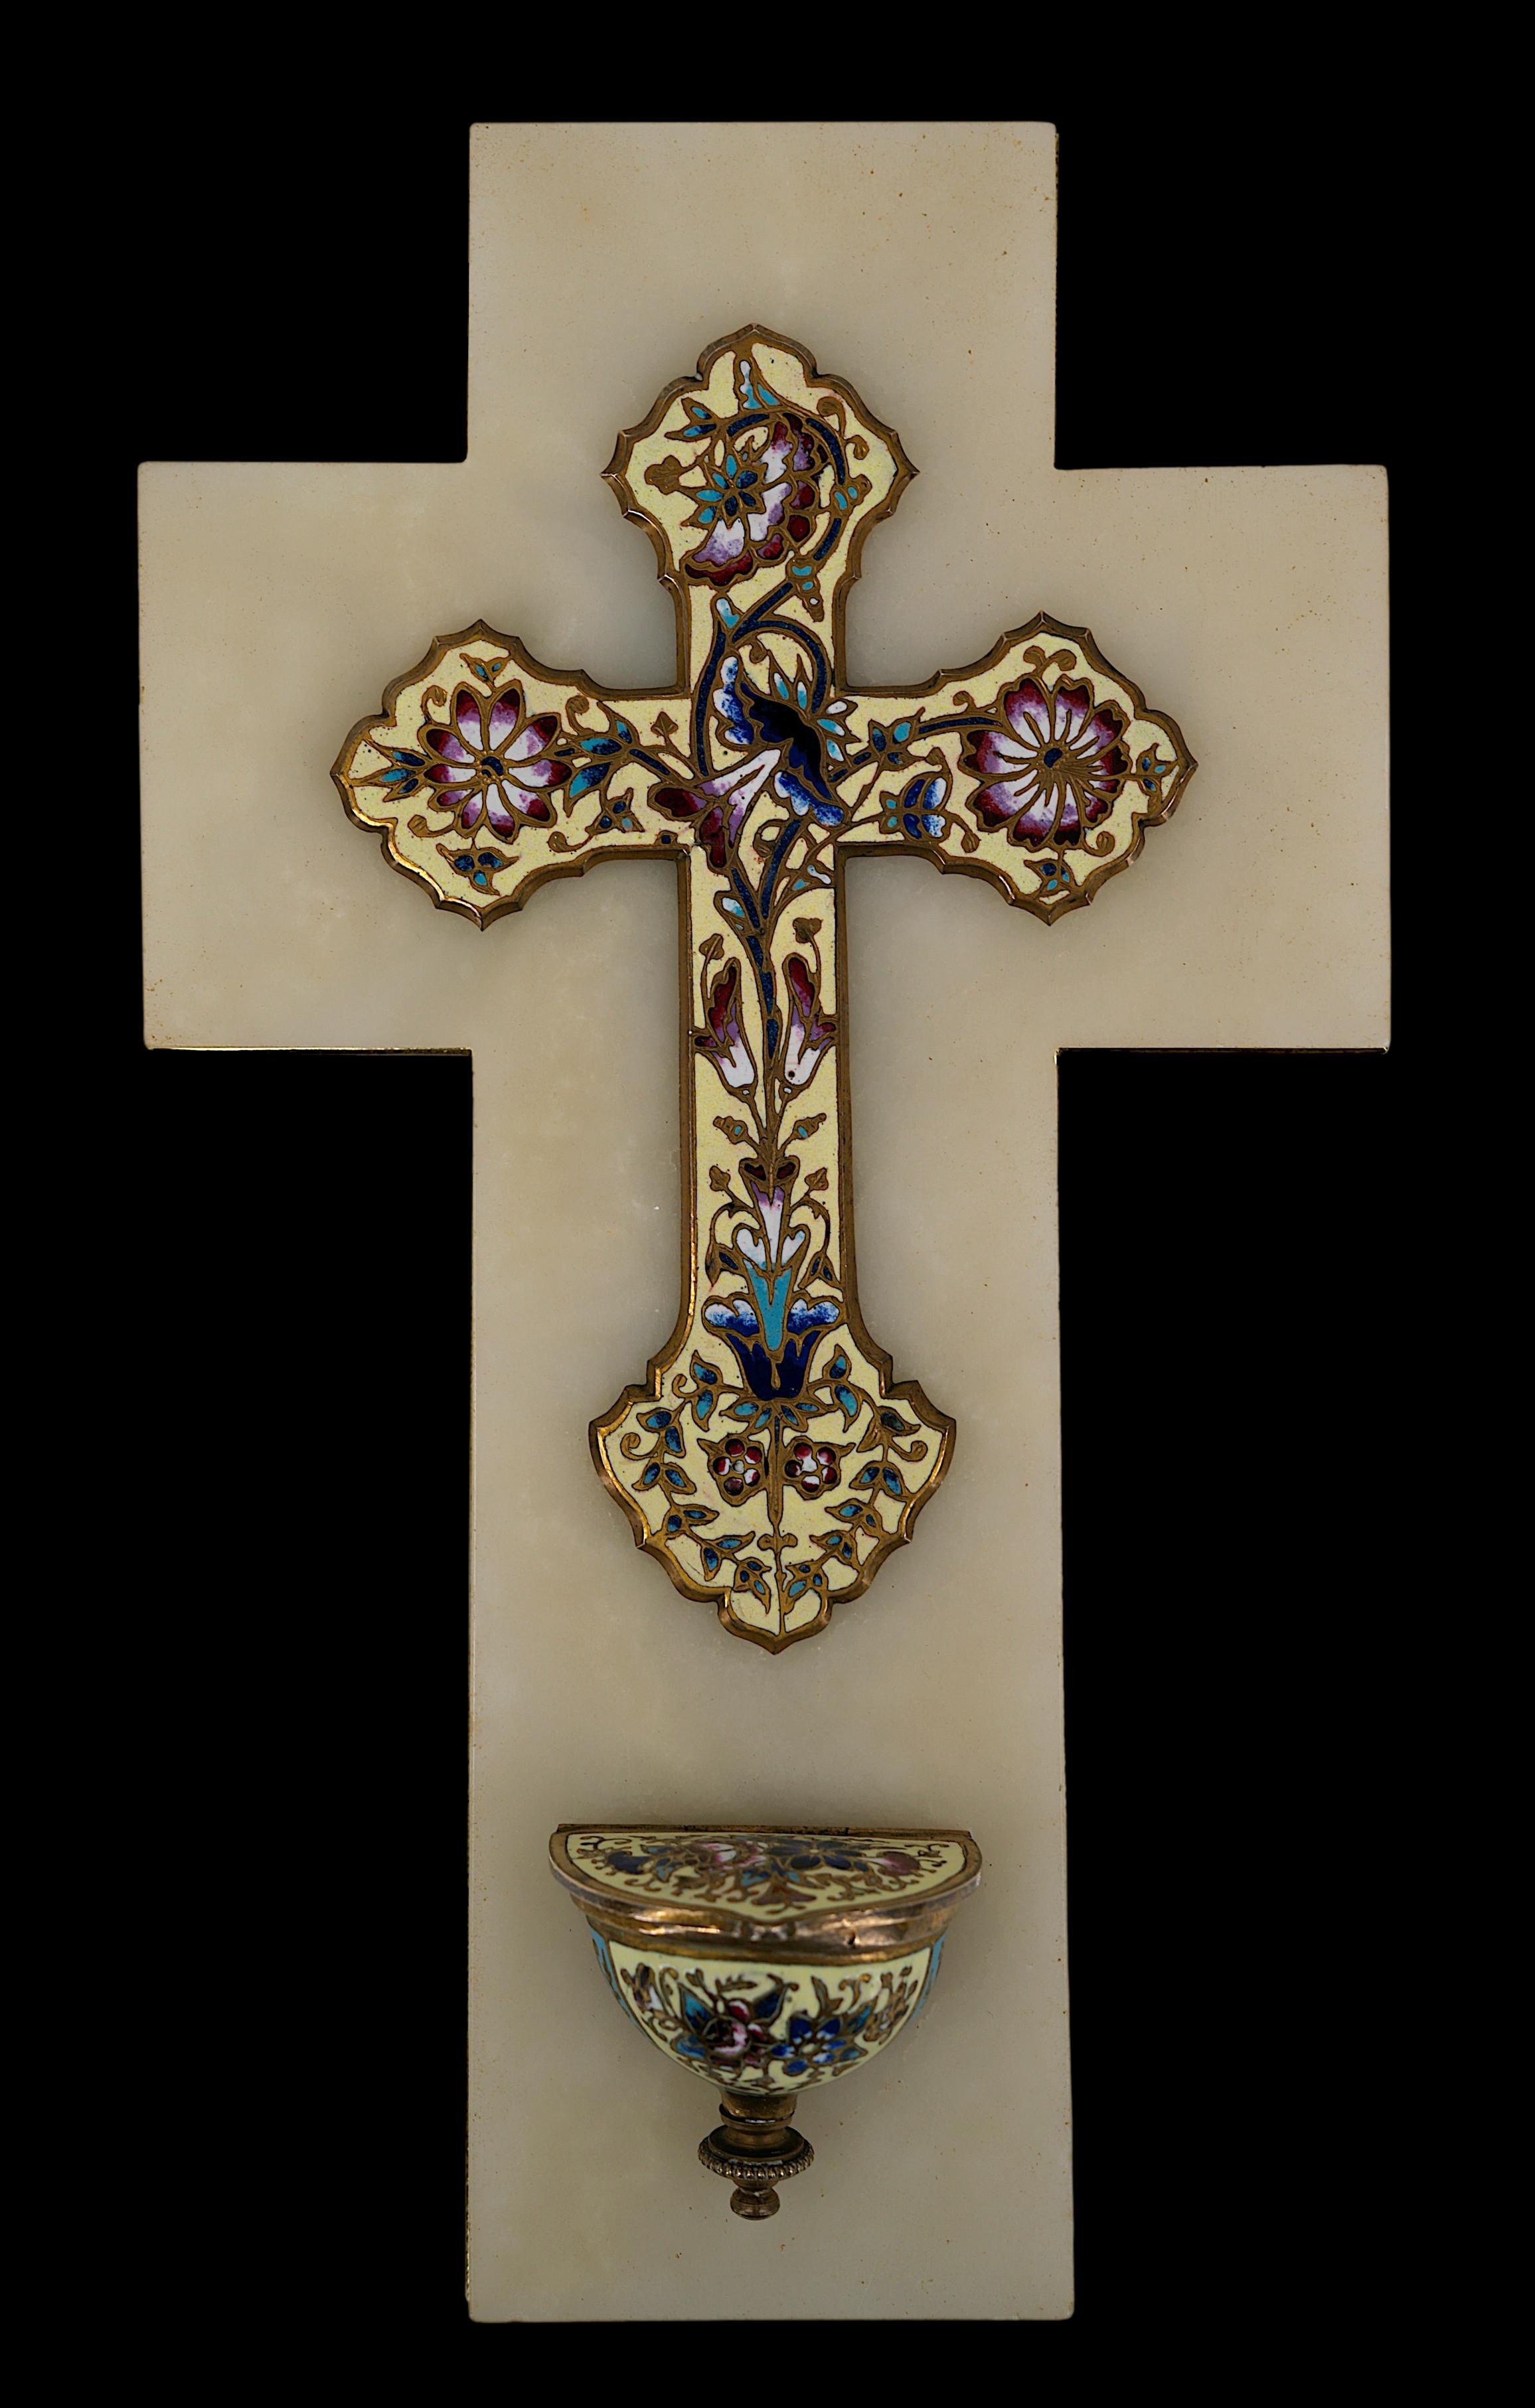 Cloisonne bronze stoup crucifix on an onyx and bronze stand, France, ca.1920. Measures: Height: 10